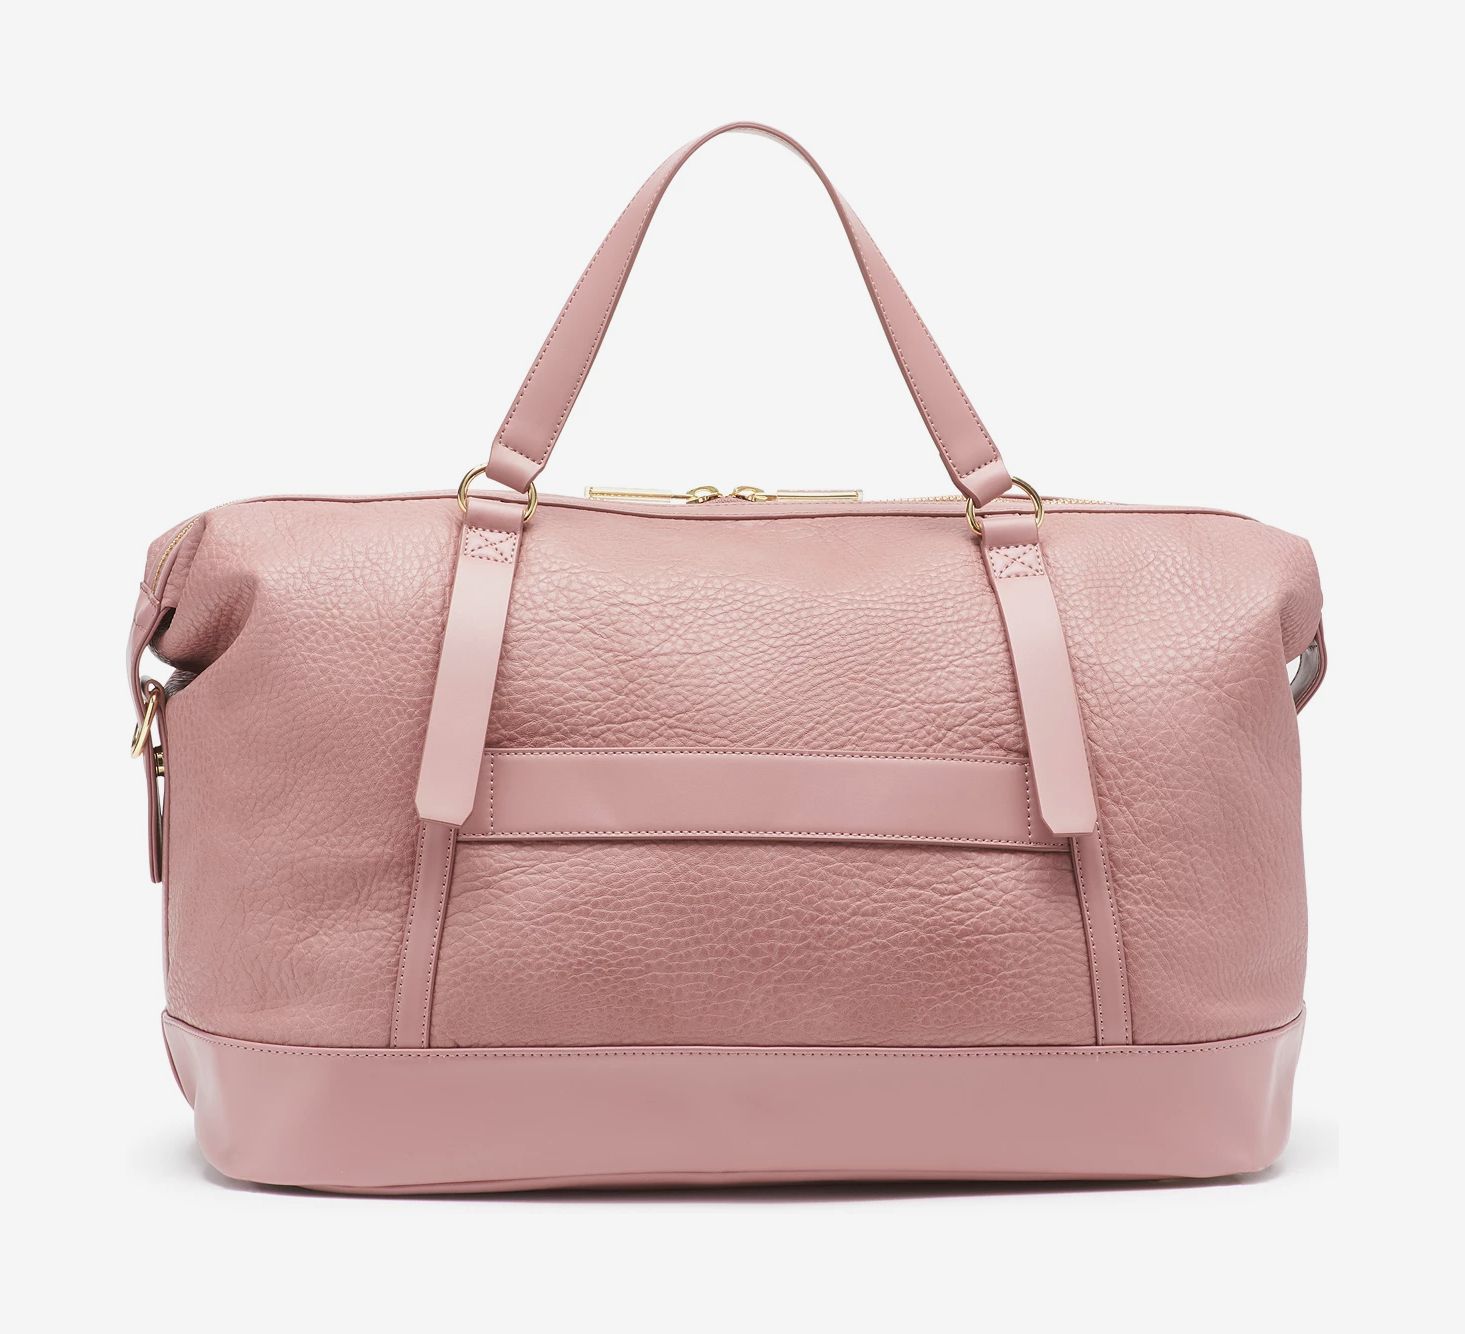 27 Best Weekender Bags for Women That Aren't Ugly